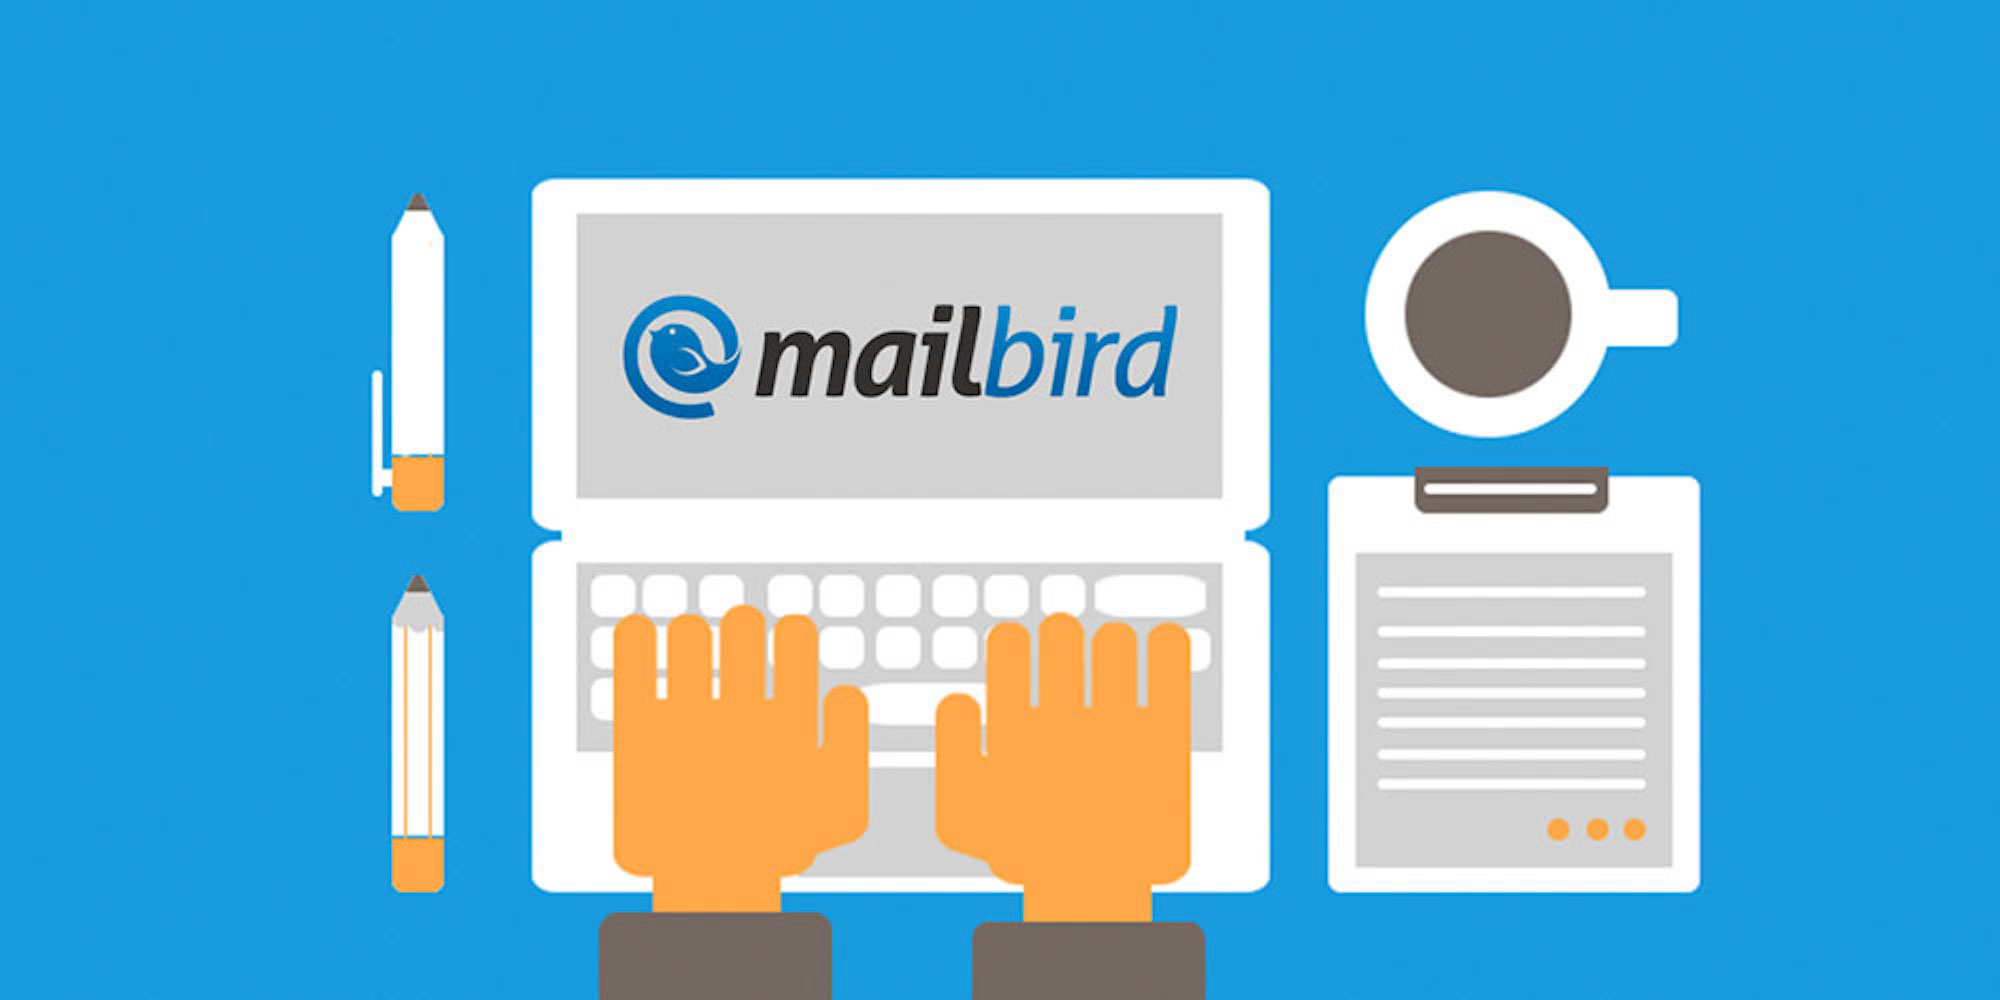 mailbird attached images are thumbnails